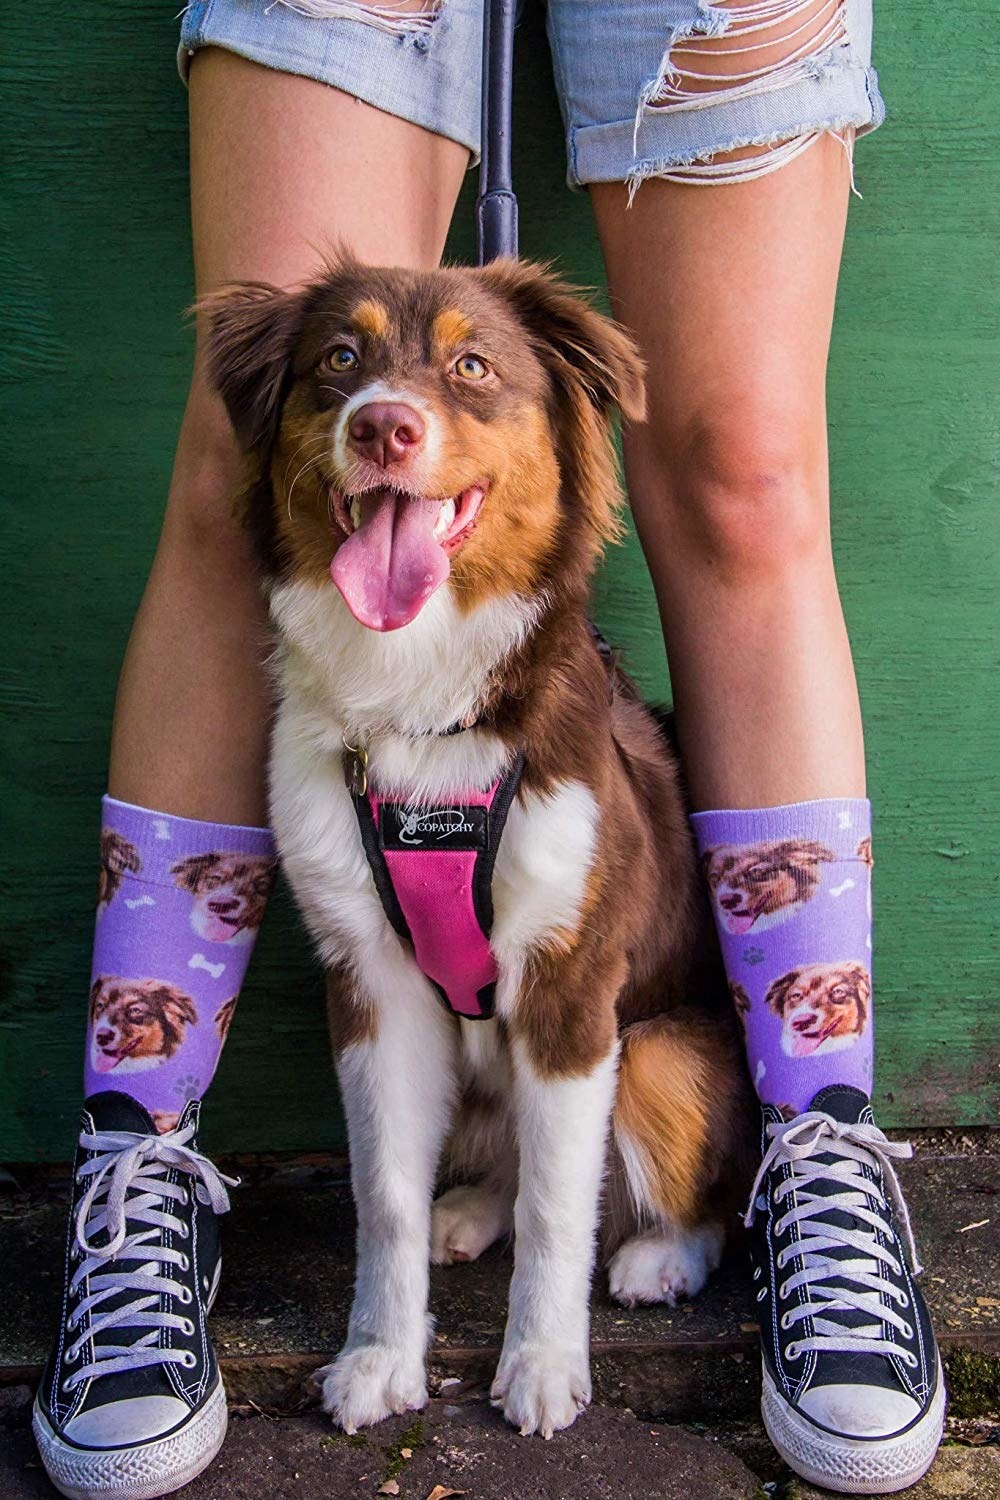 dog sits next to socks with its face on them